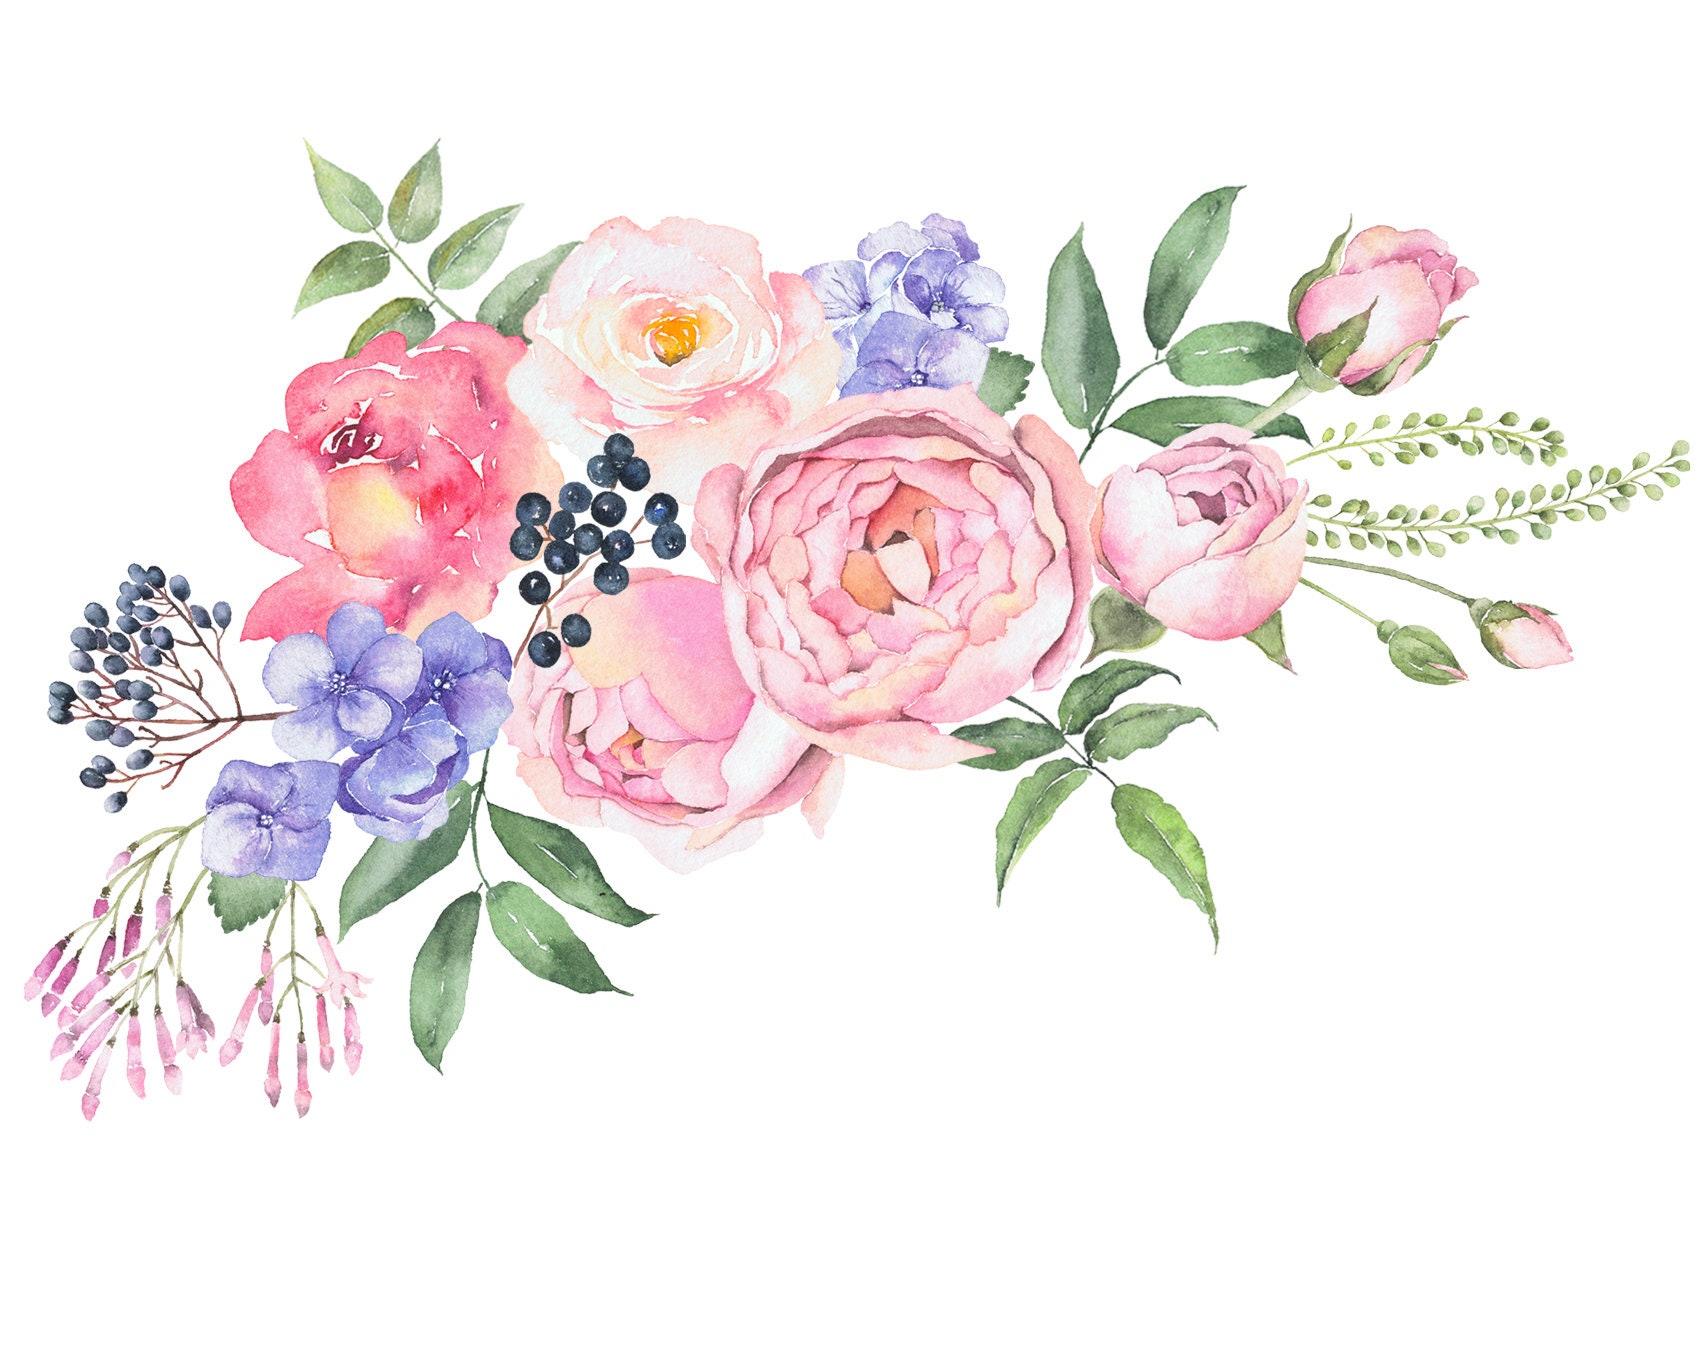 Watercolor Floral Clipart Set dear Rose Pre-made - Etsy